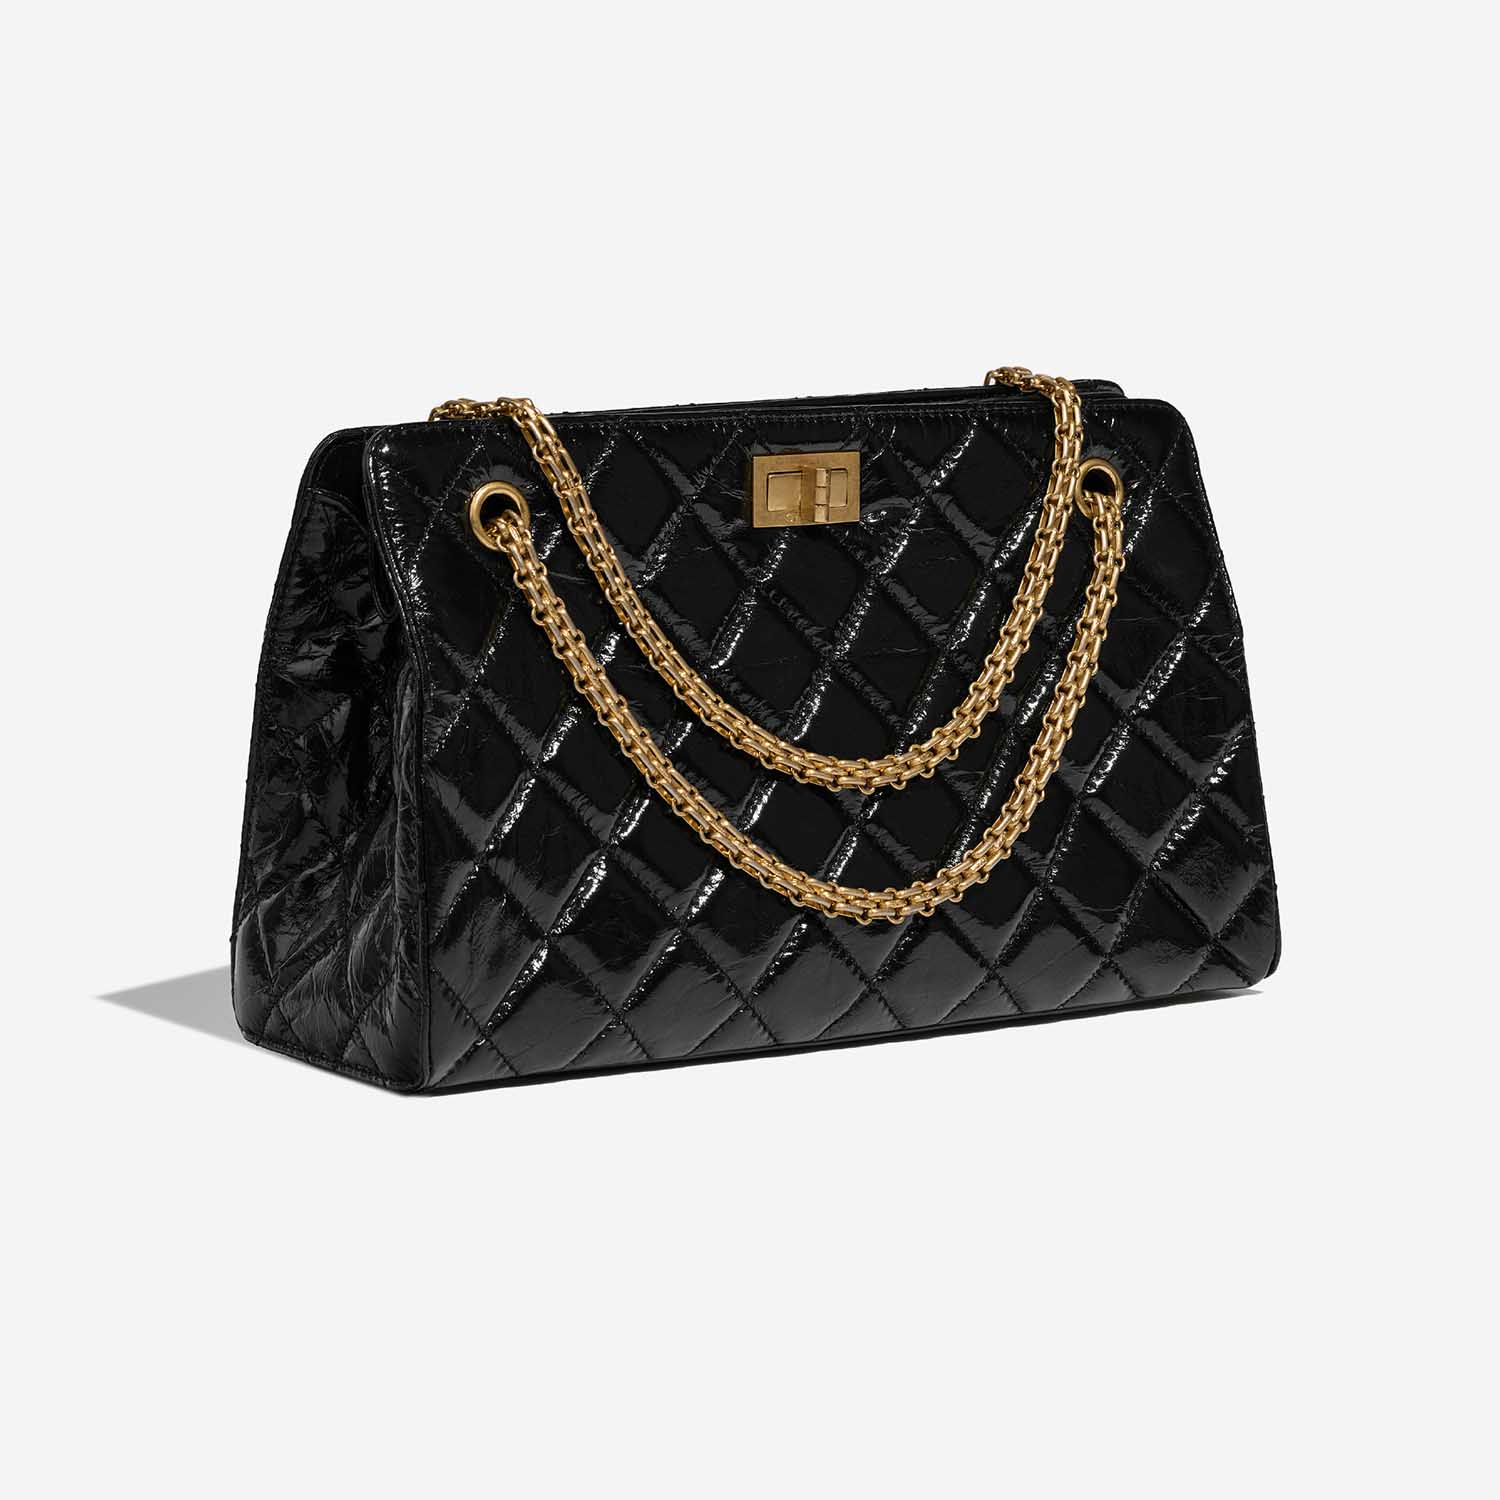 Pre-owned Chanel bag 2.55 Reissue Handle Patent Black Black | Sell your designer bag on Saclab.com